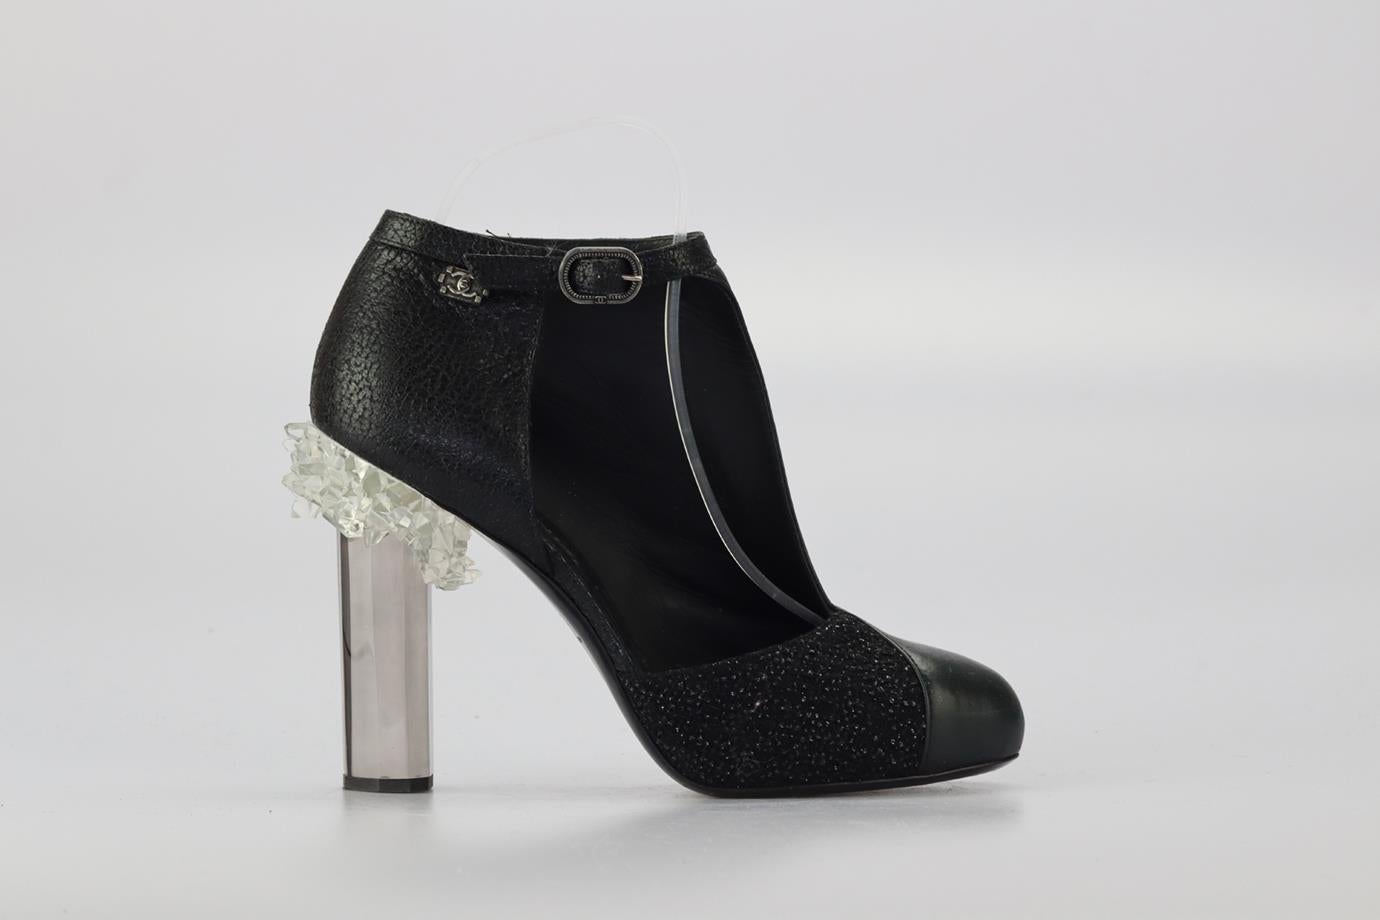 Chanel 2012 Tweed And Leather Ankle Boots. Black. Buckle fastening - Side. Does not come with - dustbag or box. EU 38.5 (UK 5.5, US 8.5). Insole: 9.6 in. Heel height: 4.3 in. Condition: Used. Good condition - Wear to soles. Some scuff marks to upper